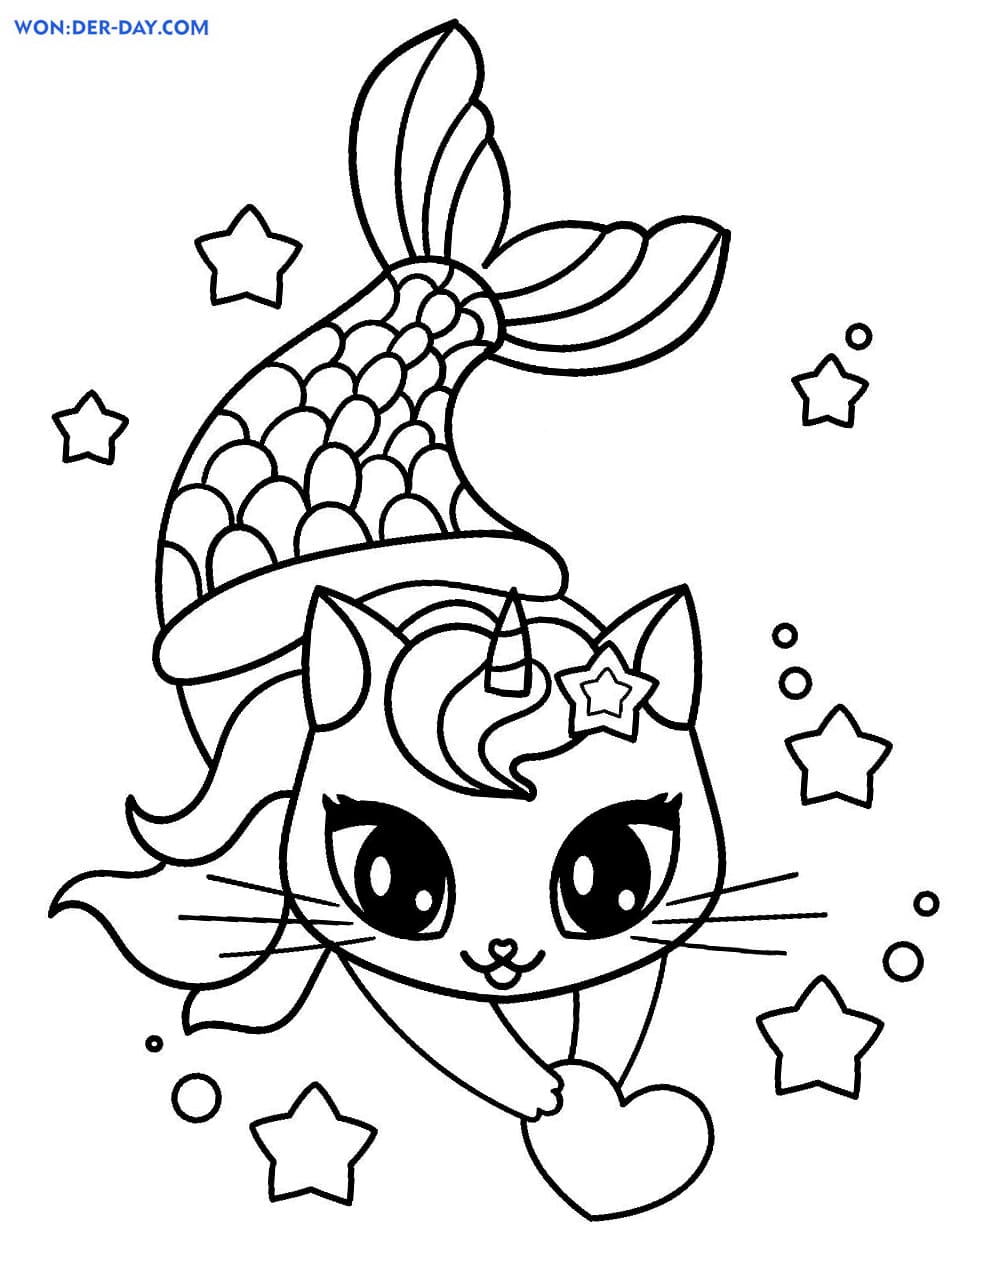 Unicorn Cat Coloring Pages   Free Coloring Pages   Coloring Home